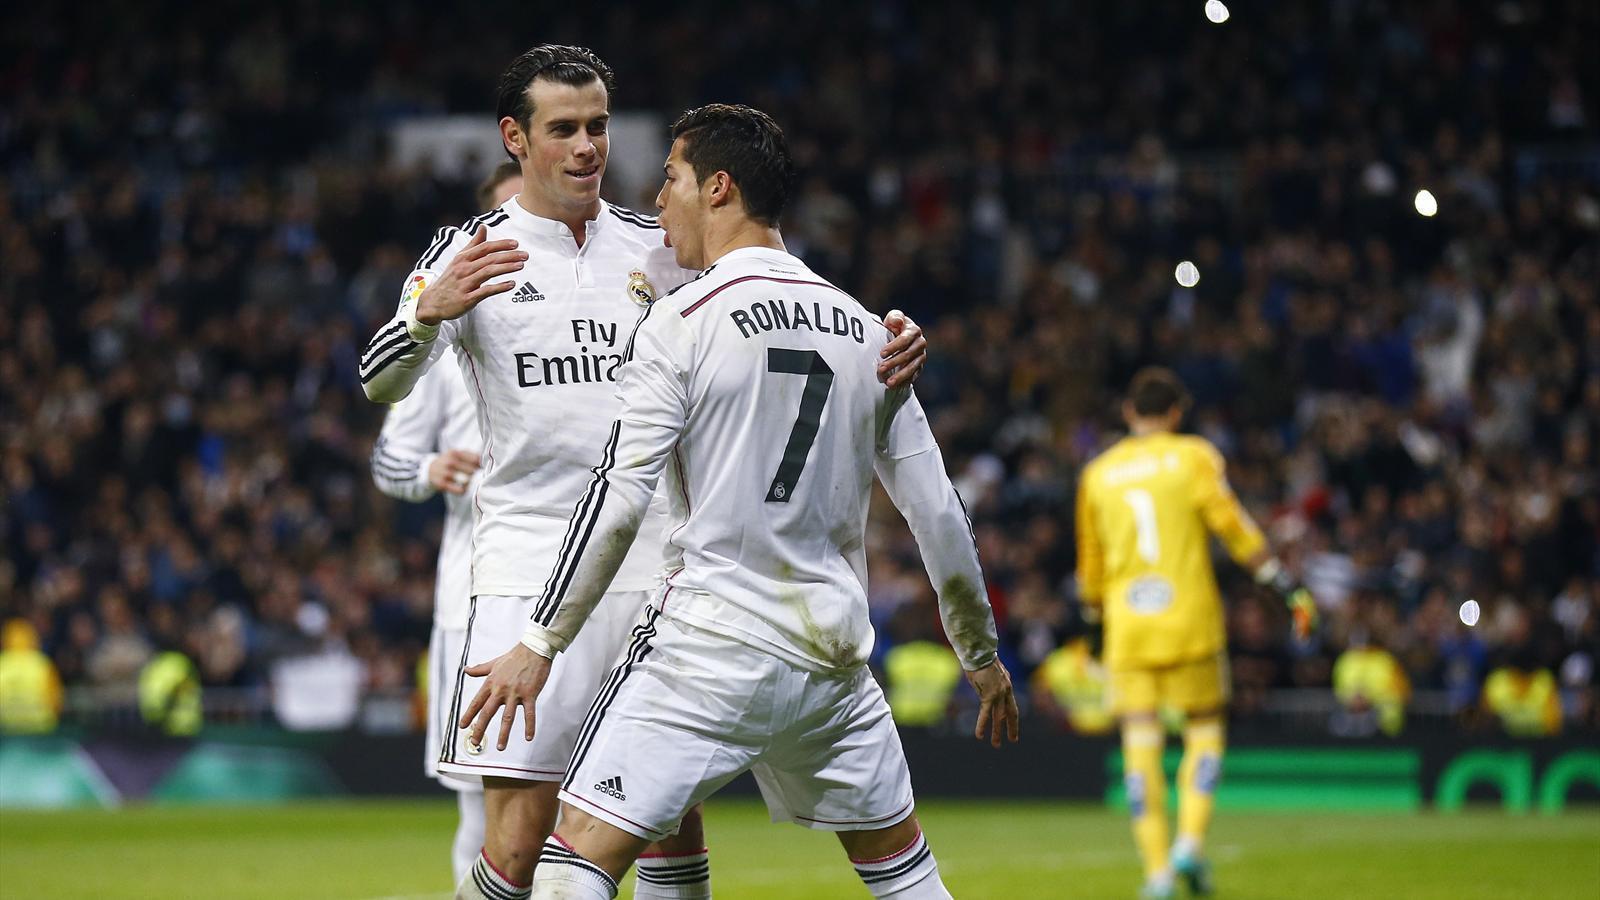 Cr7 And Bale HD Wallpaper 2015